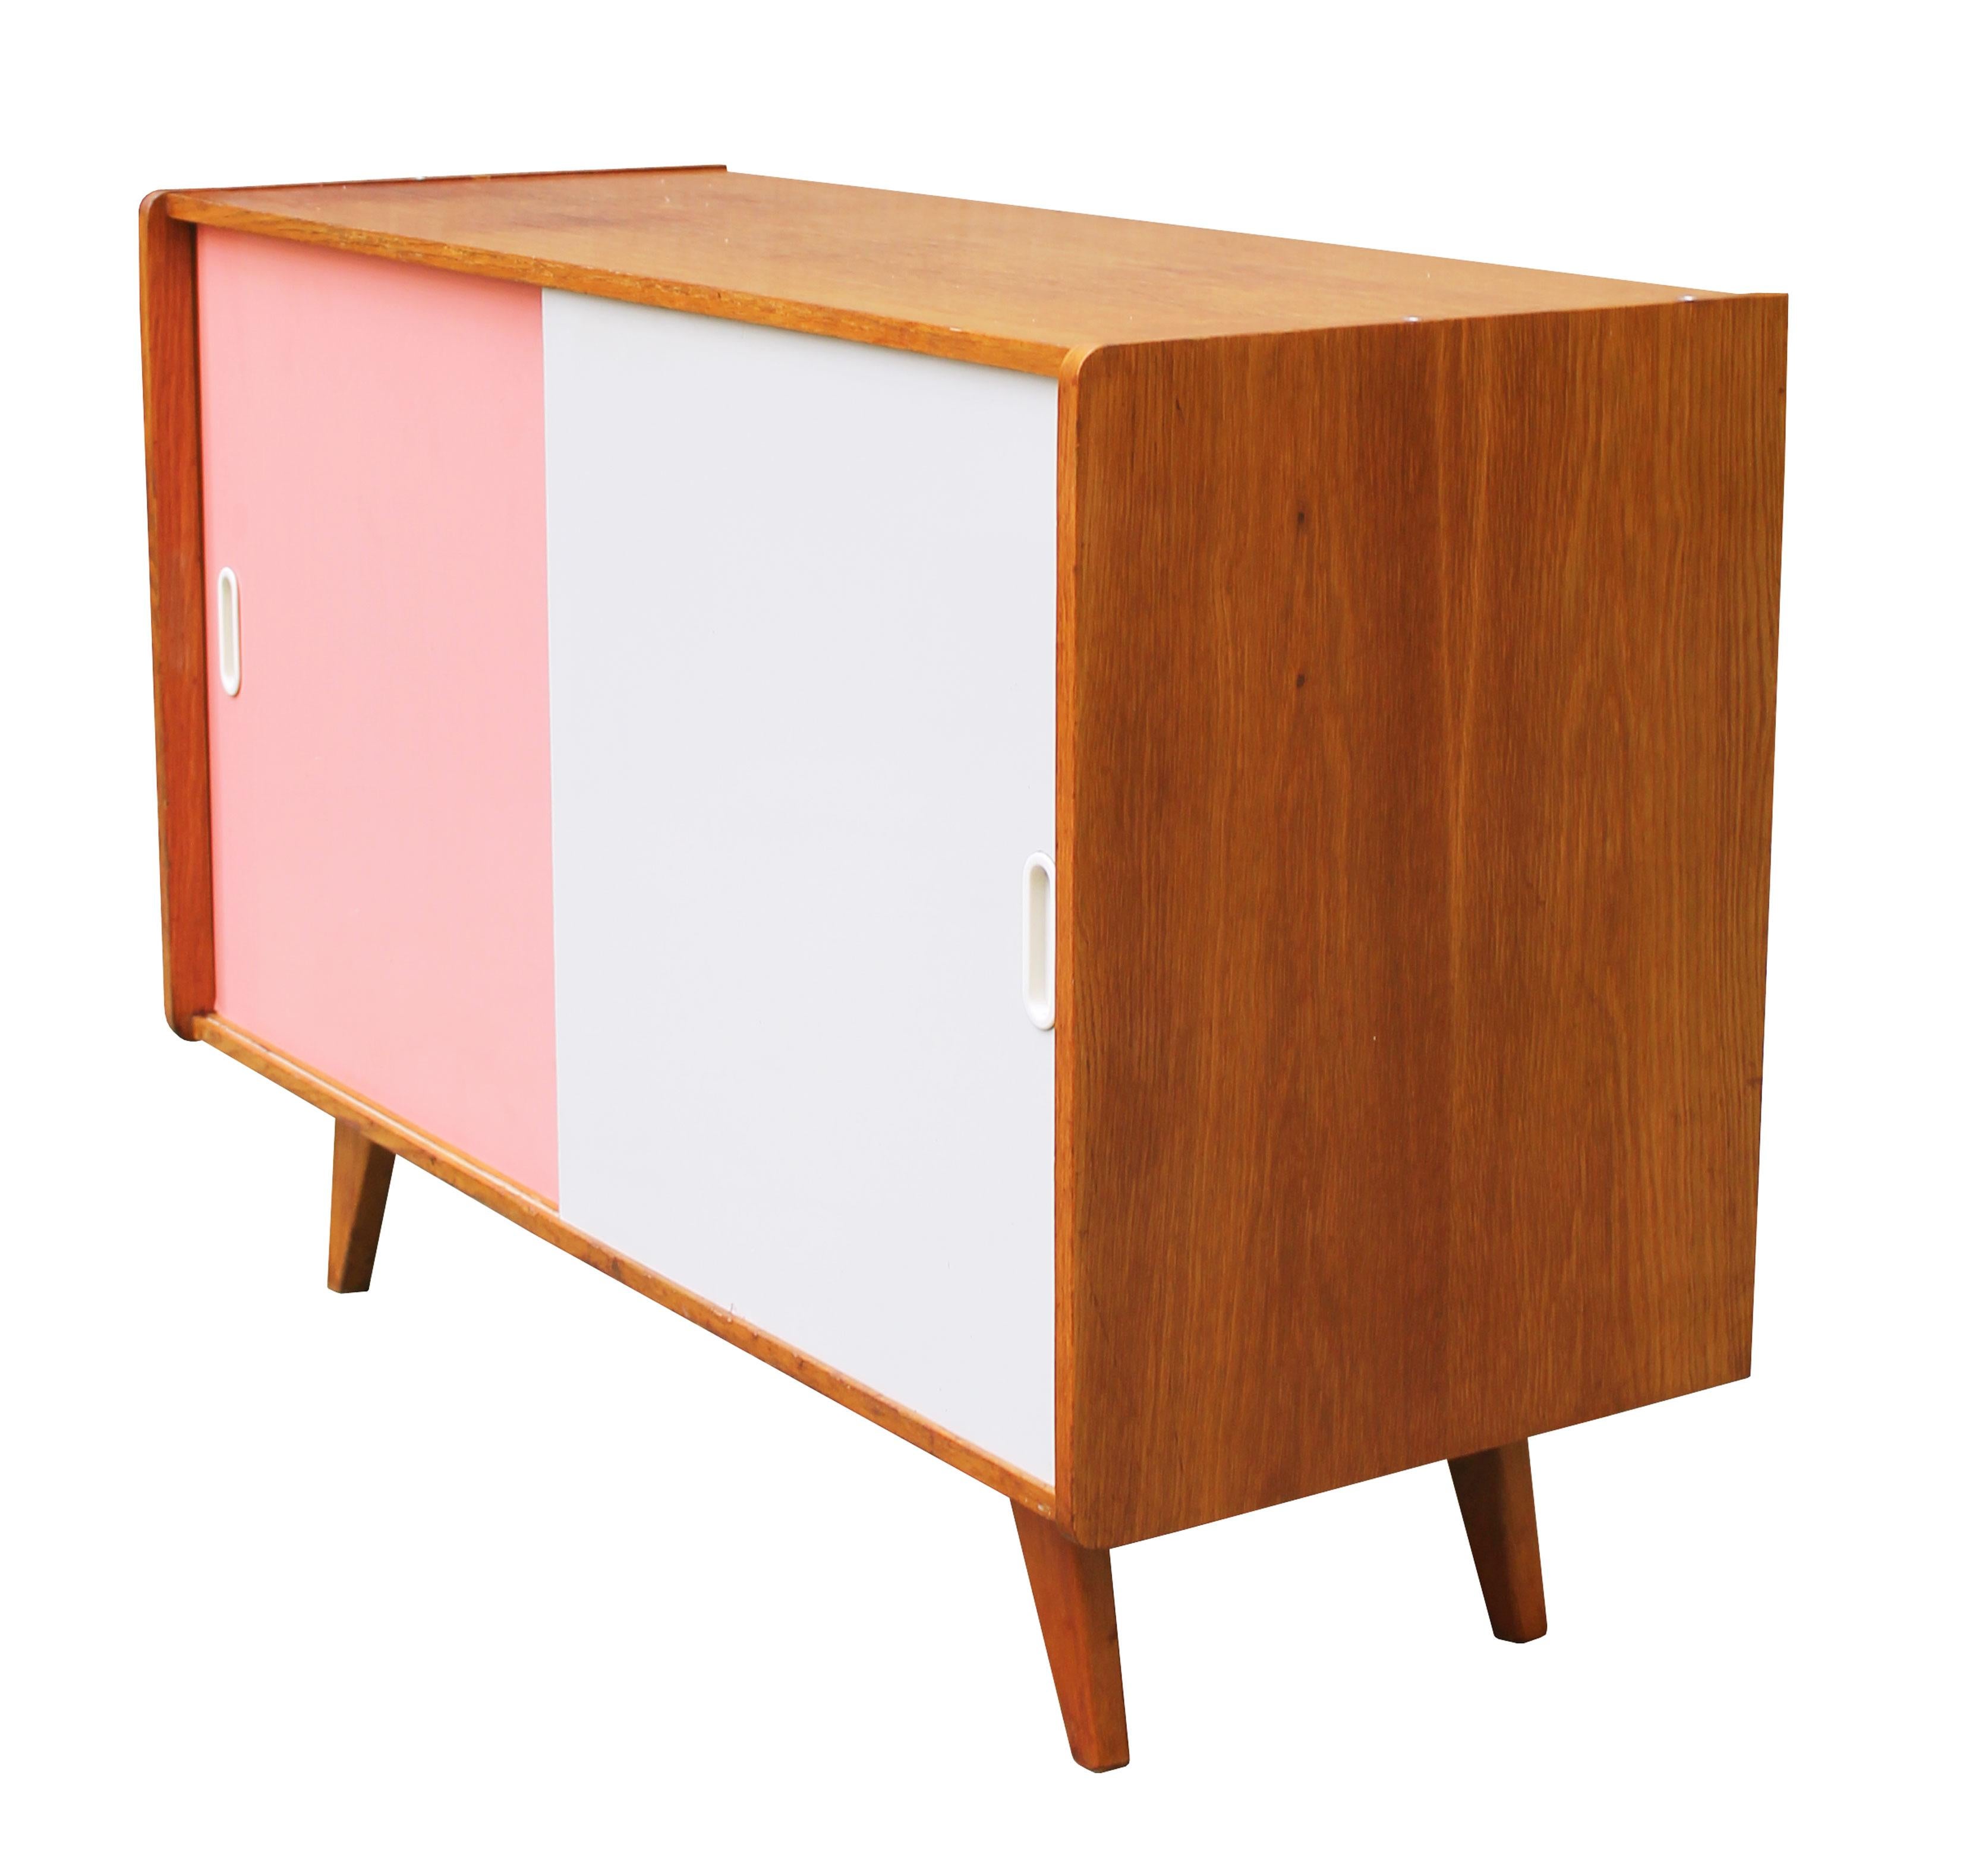 The U-452 mid-century sideboard with pink and white sliding doors, was designed by the Czech furniture designer Jiri Jiroutek. It is part of the popular U collection manufactured by Interier Praha in the 1960s Czechoslovakia. 

This piece perfectly